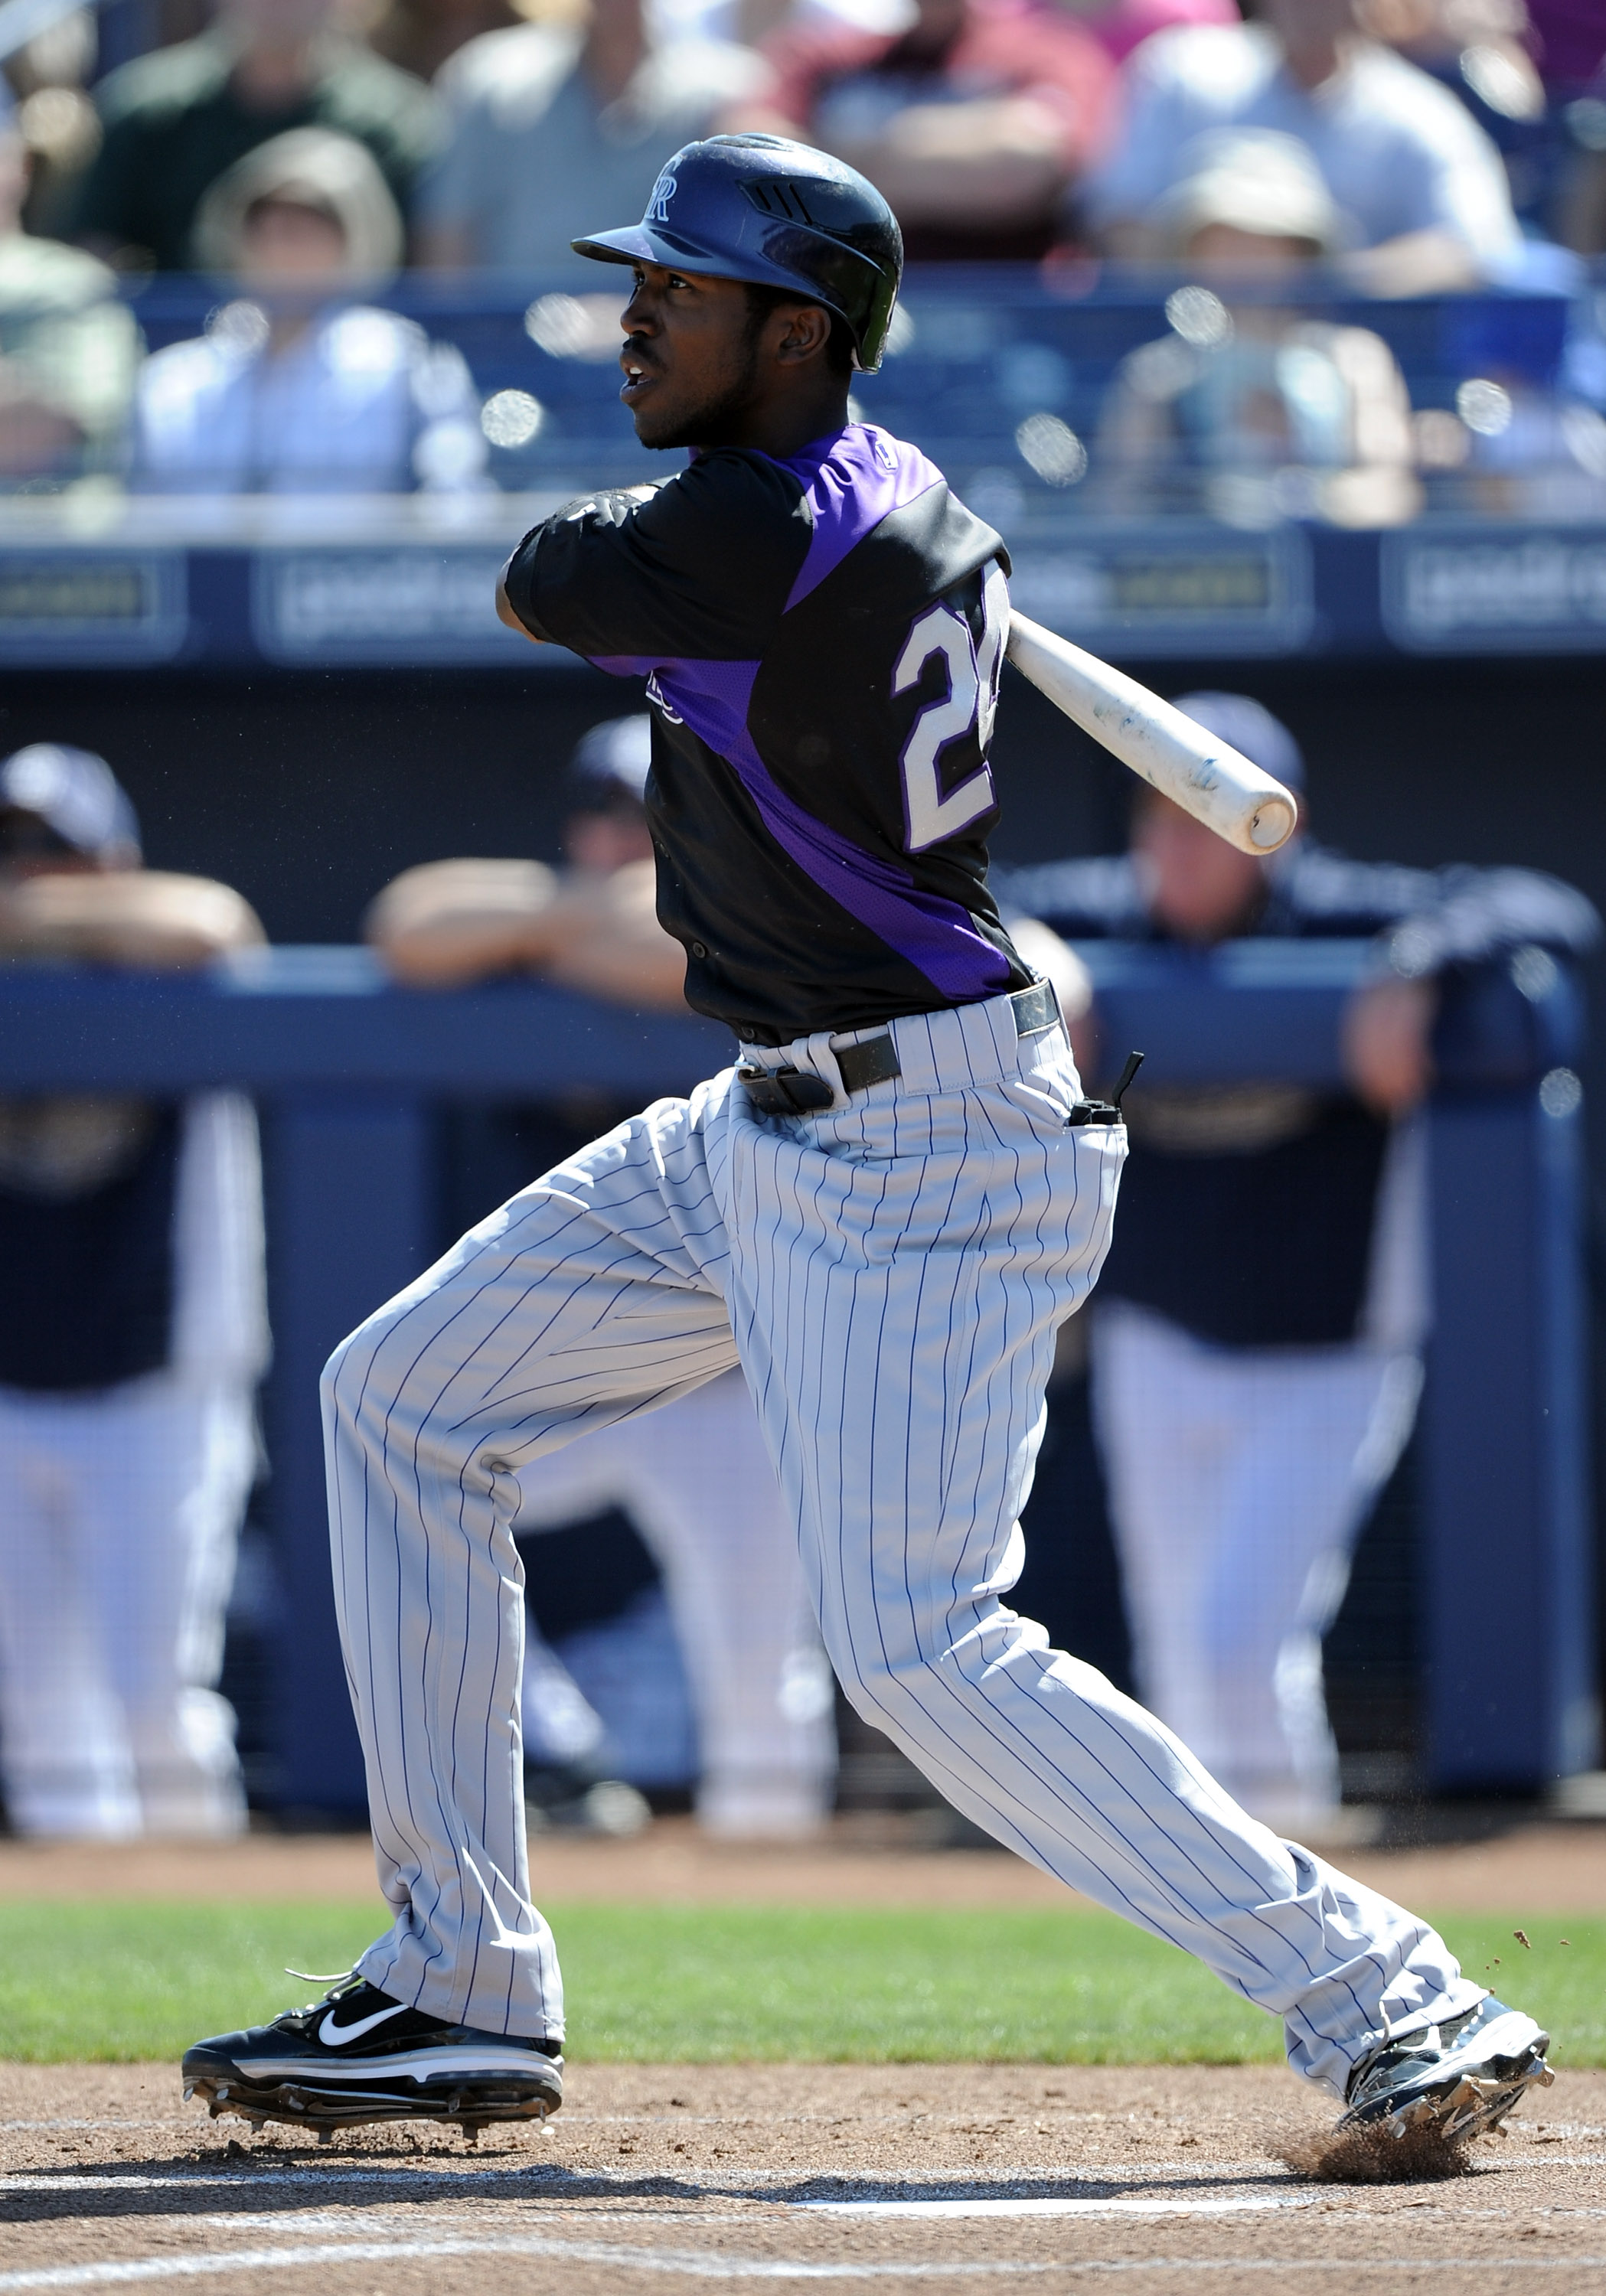 PEORIA, AZ - MARCH 02:  Dexter Fowler #24 of the Colorado Rockies at bat against the San Diego Padres during spring training at Peoria Stadium on March 2, 2011 in Peoria, Arizona.  (Photo by Harry How/Getty Images)